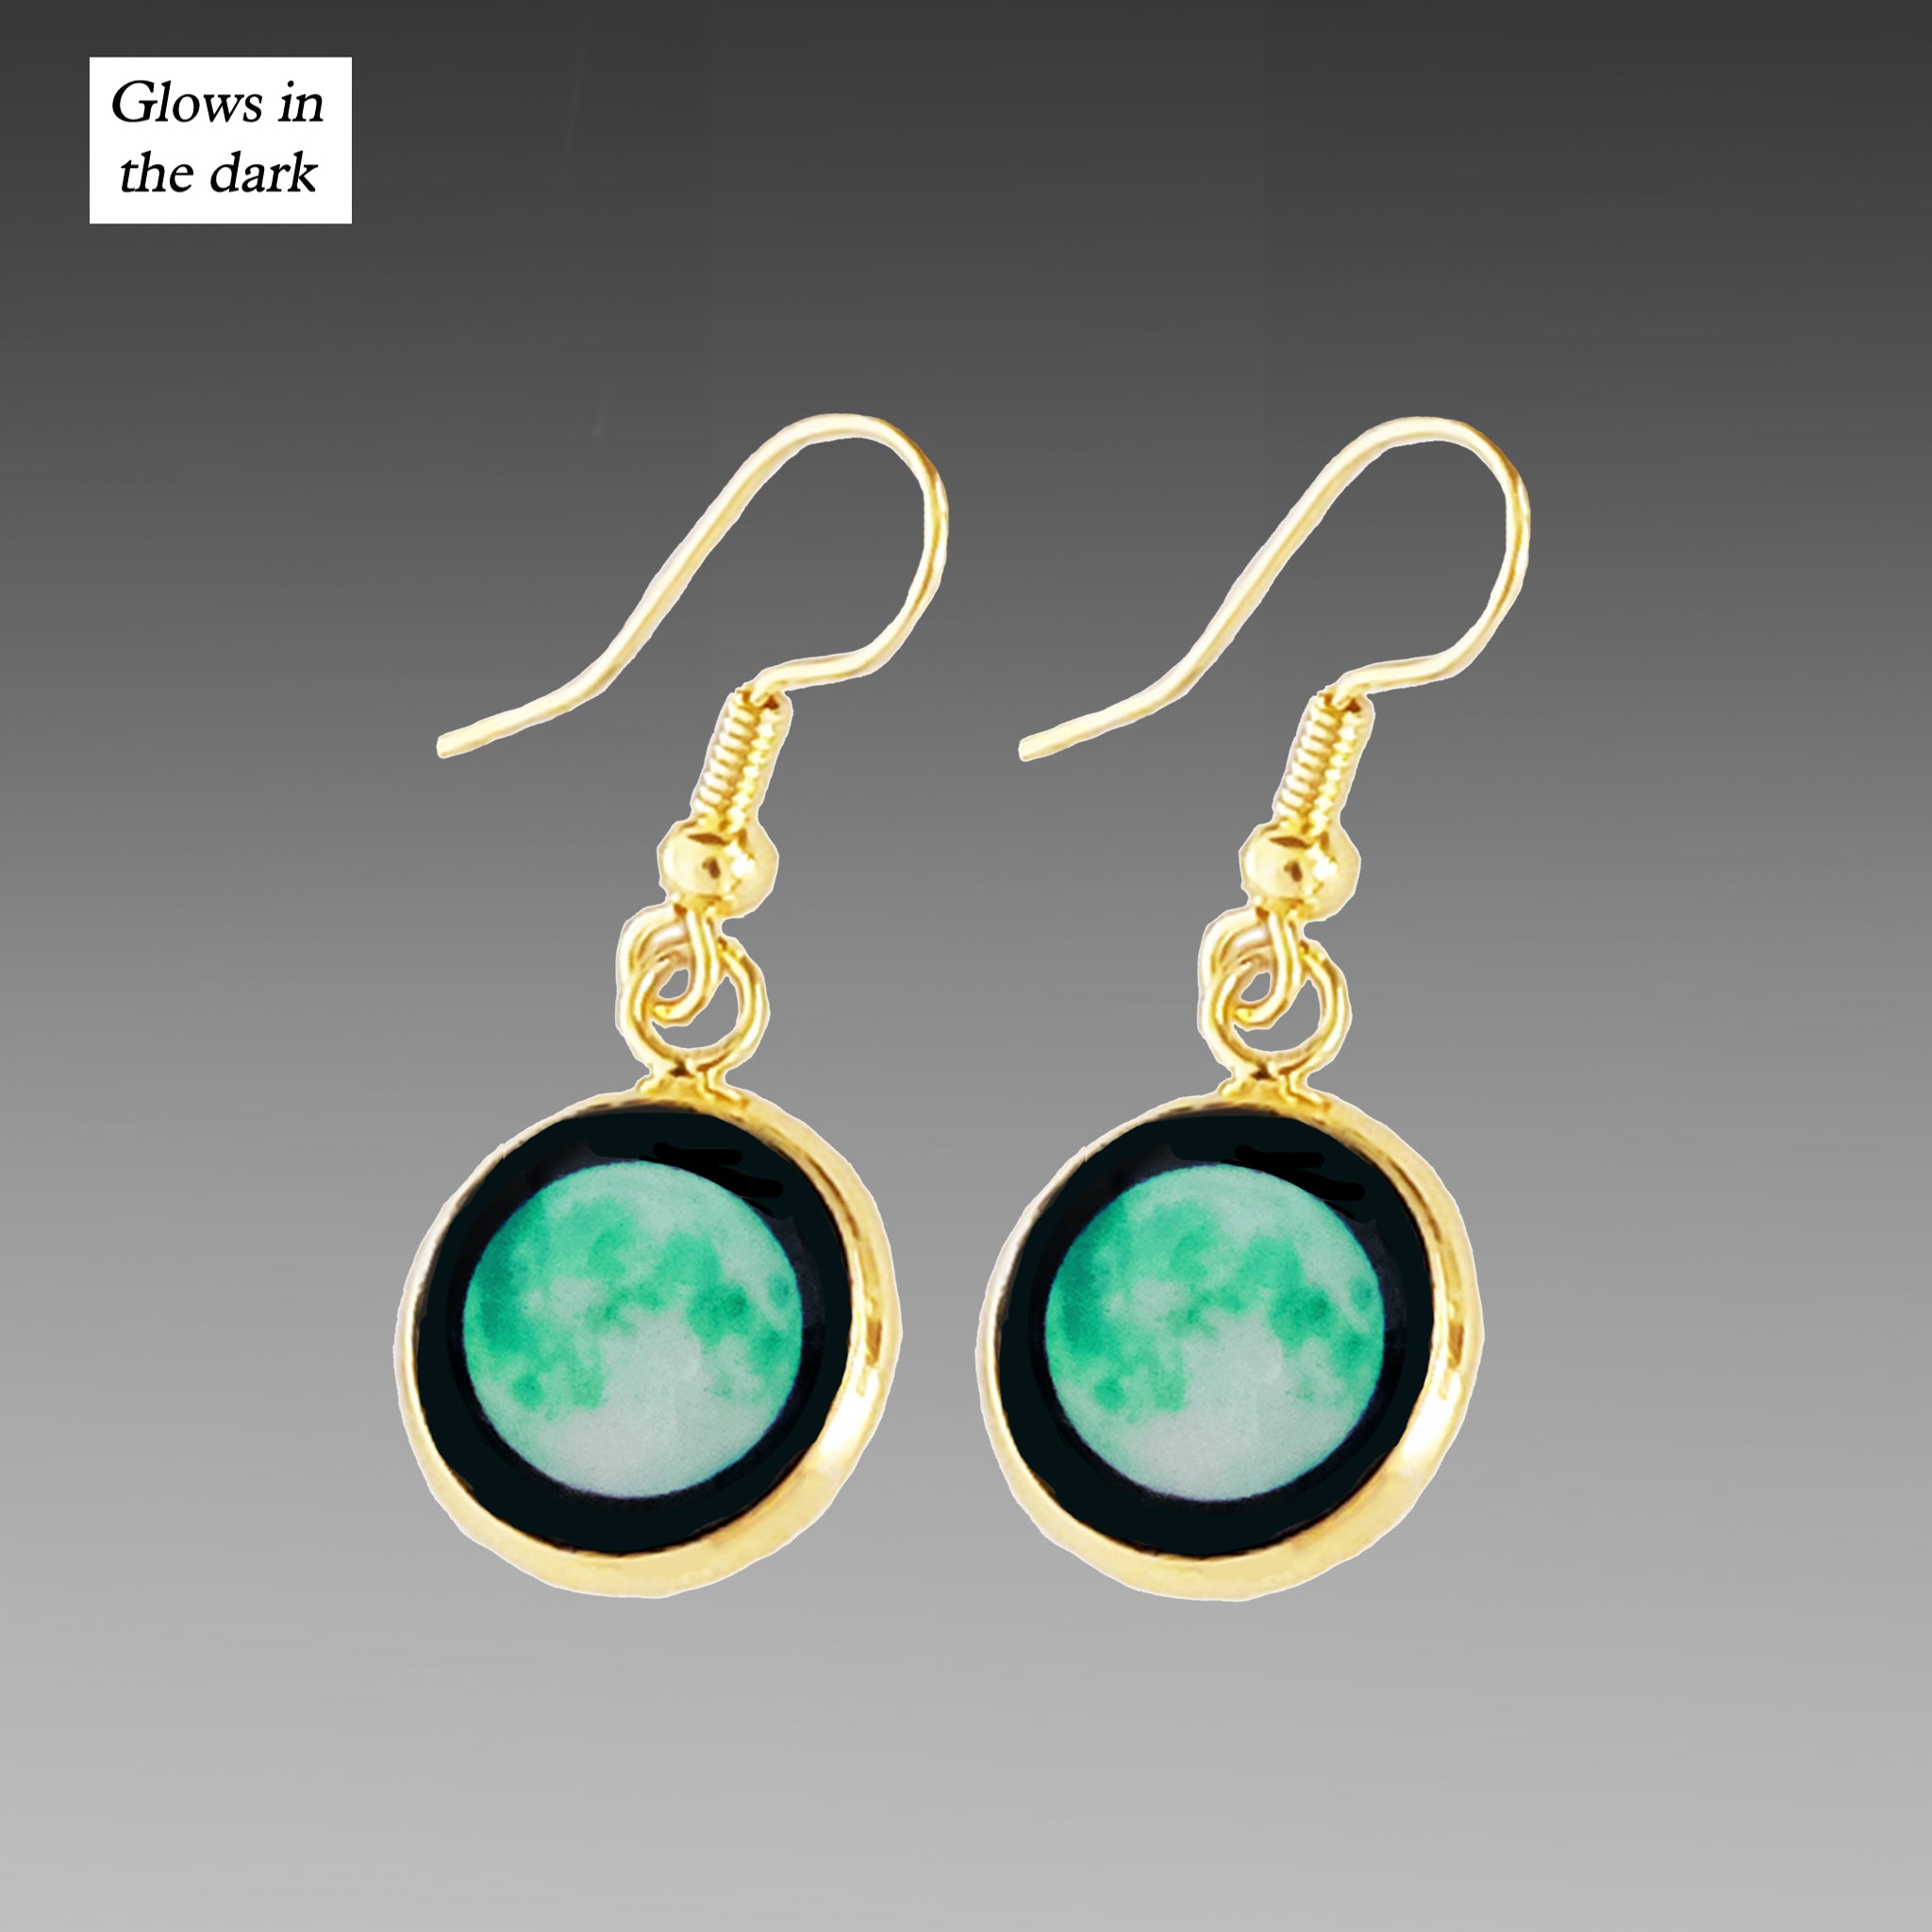 Glowing Moon Phase Earrings in Gold Plating